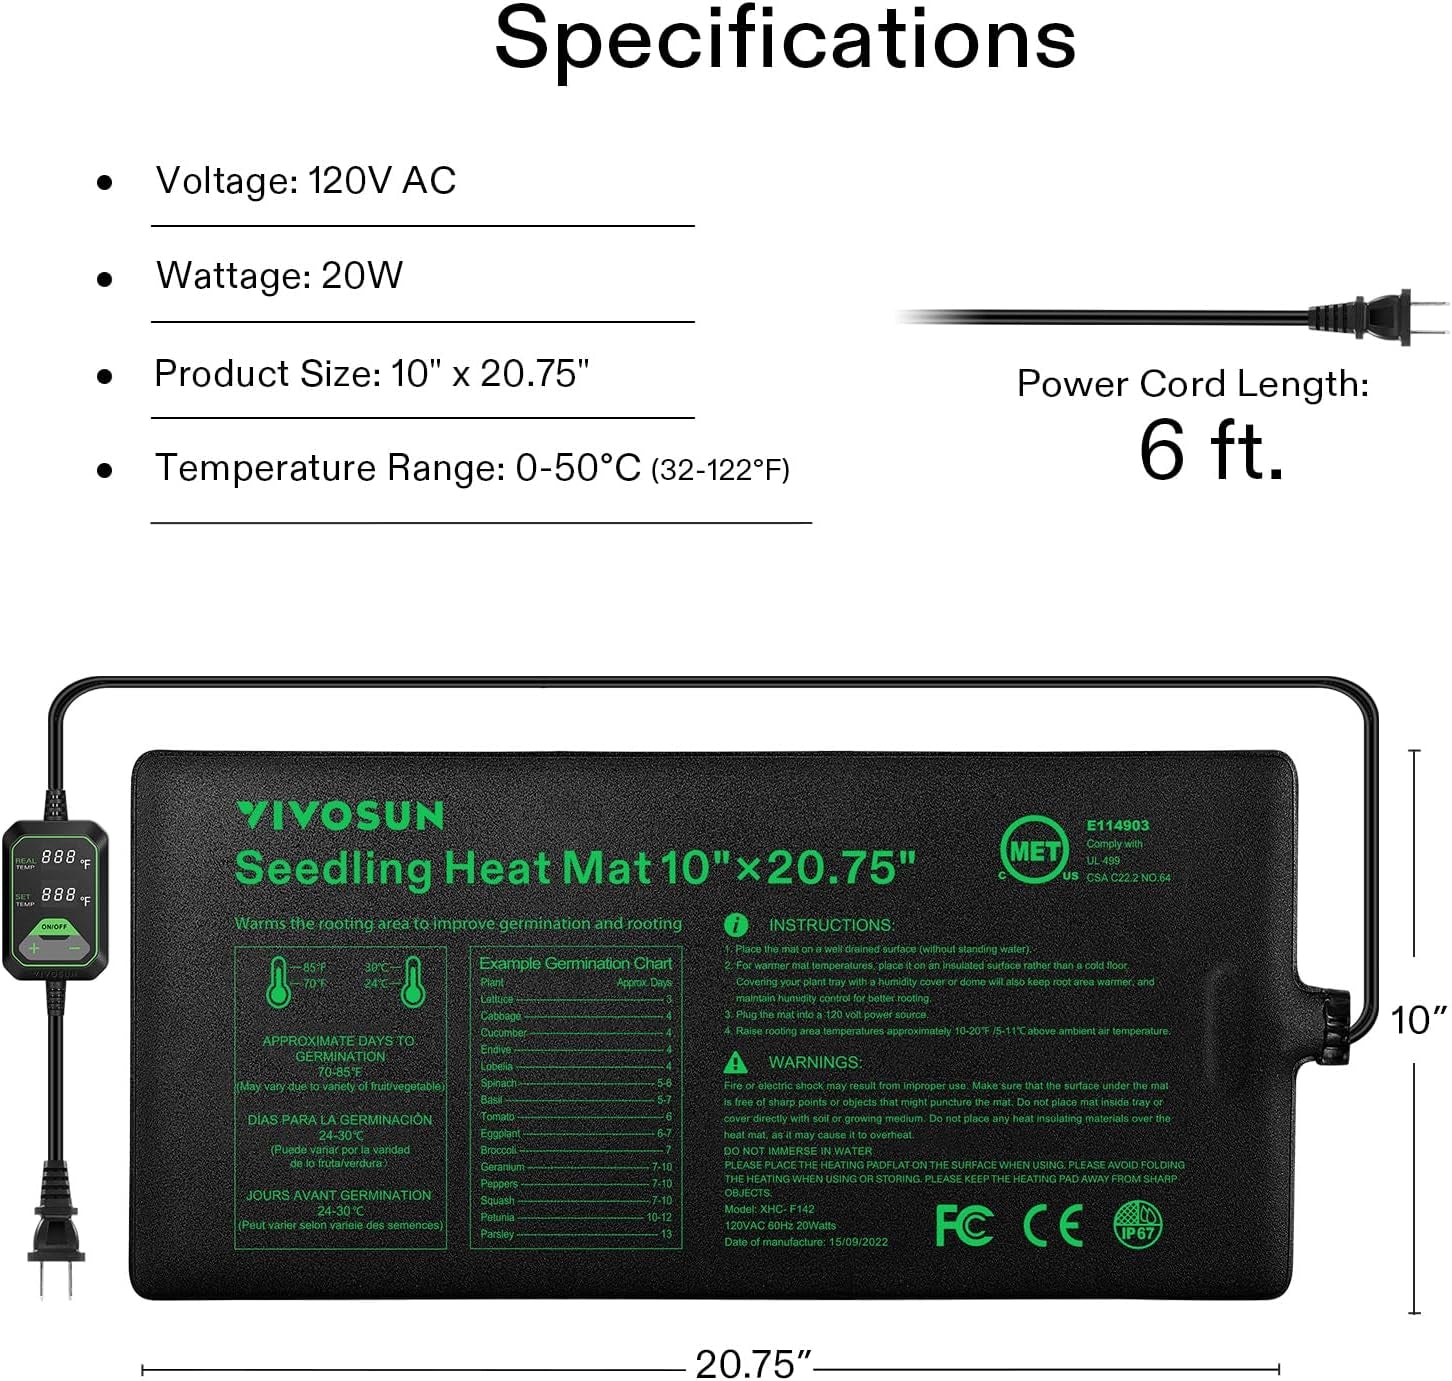 10"X20.75" Seedling Heat Mat with Built-In Temperature Controller, UL & Met-Certified Waterproof Plant Heating Pad for Germination, Hydroponics, Brewing, Breeding, and Greenhouses